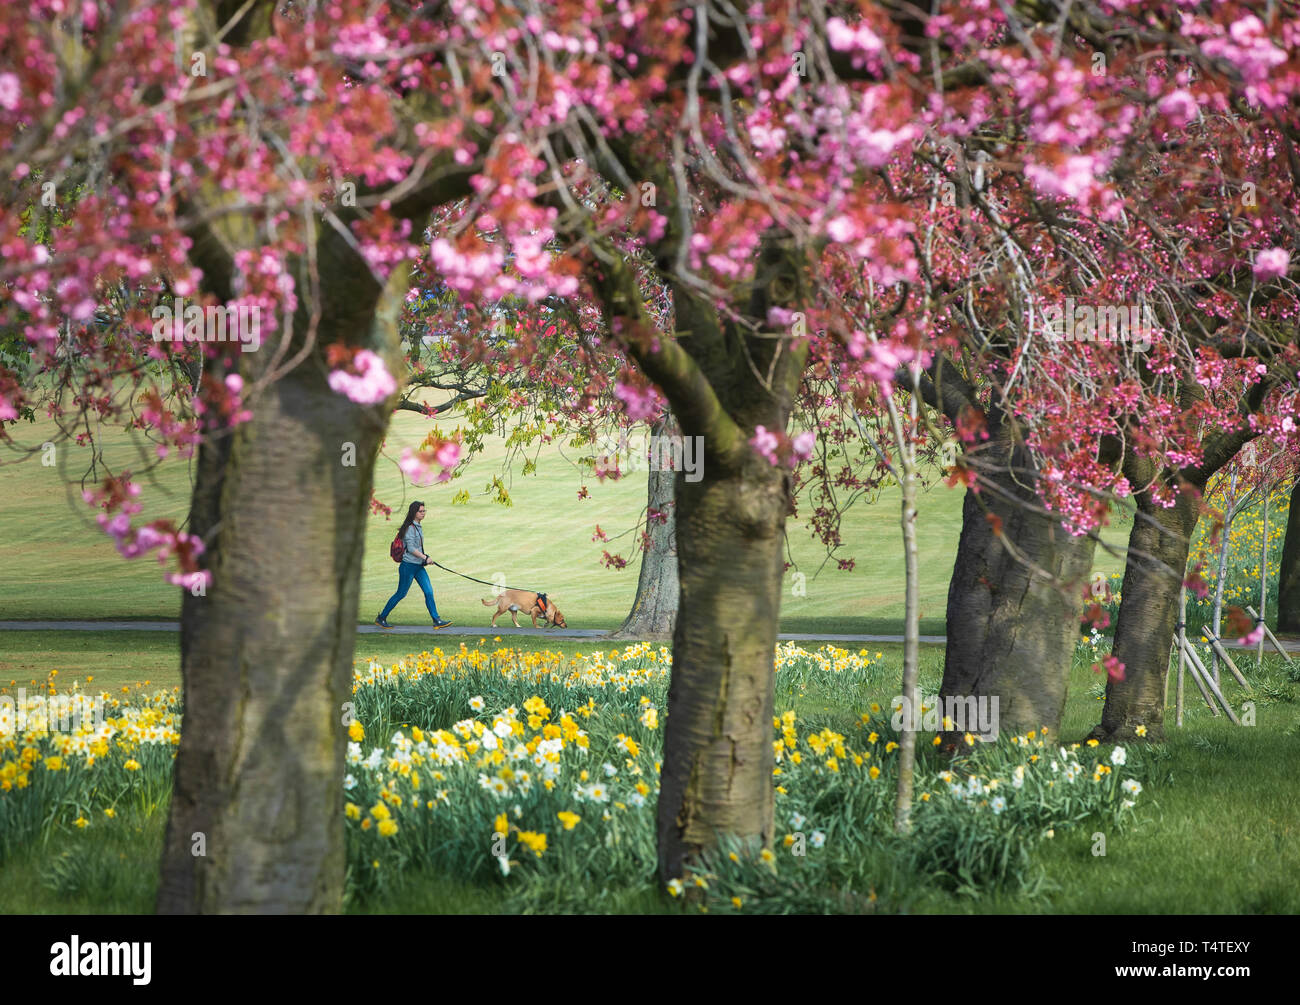 A woman walks a dog along a path lined with cherry blossoms in Harrogate, Yorkshire, as Britain sees warmer spring weather this week, with temperatures reaching up to 22 degrees Celsius in time for the Easter weekend. Stock Photo